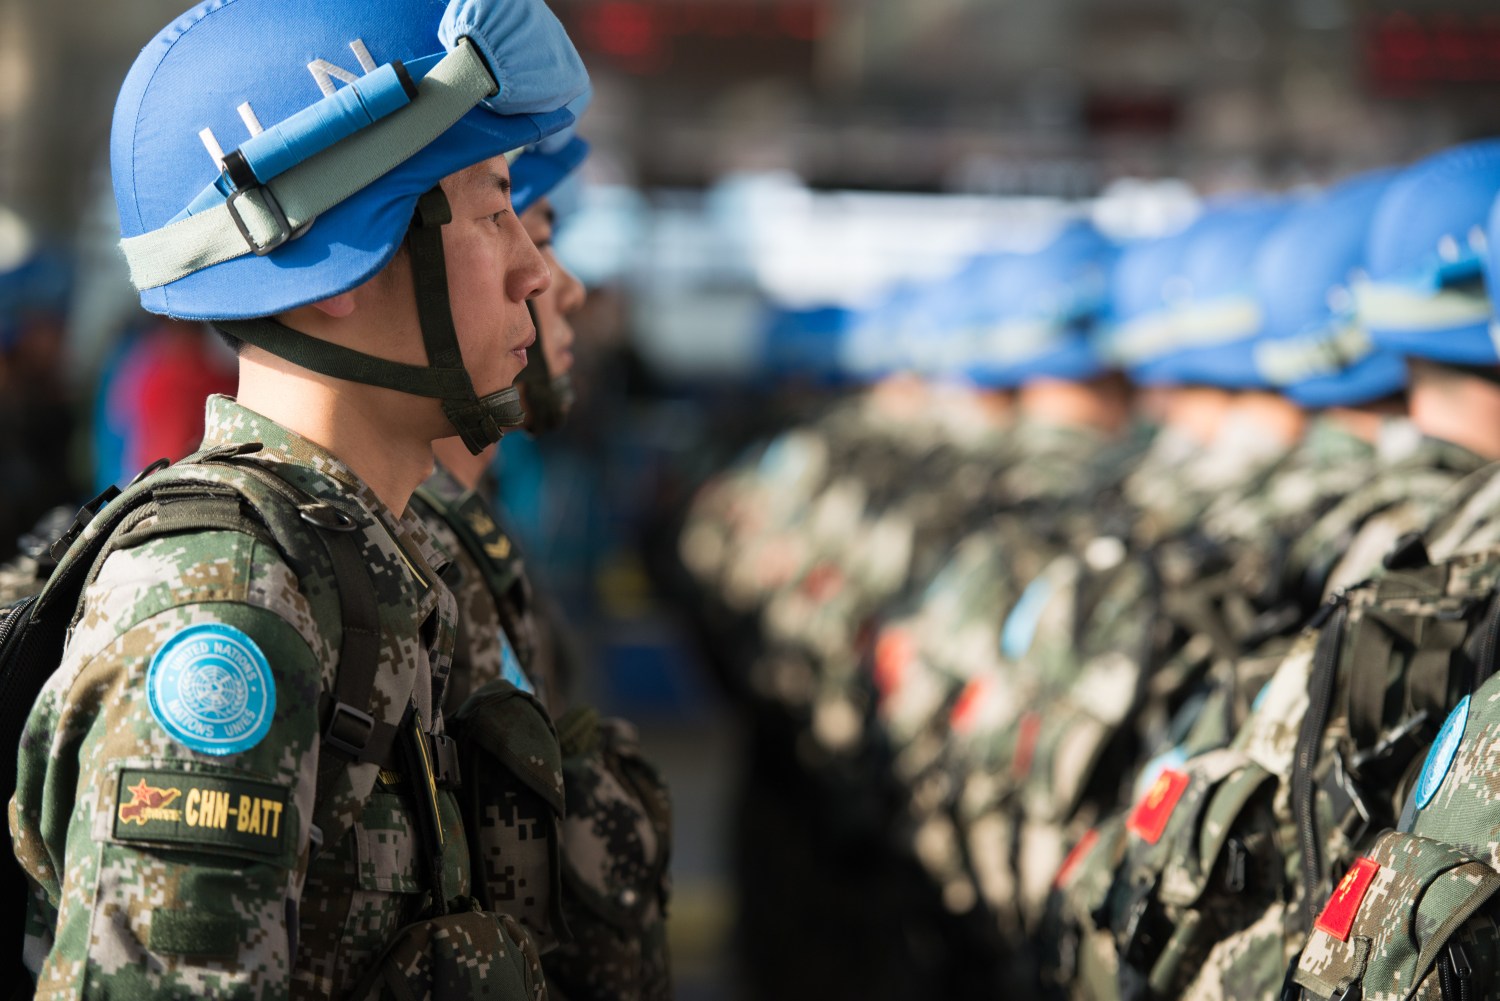 --FILE--Chinese peacekeepers line up during a departure ceremony before flying to South Sudan for UN peacekeeping missions at Jinan Yaoqiang International Airport in Jinan city, east China's Shandong province, 7 April 2015. China will contribute 8,000 troops for a United Nations peacekeeping standby force, China's President Xi Jinping told the United Nations General Assembly on Monday (28 September 2015), a move that could make it one of the largest players in U.N. peacekeeping efforts. Xi's pledge comes as China is trying to show it is a responsible international player amid concern over its growing military might and territorial disputes in the Asia-Pacific region. During a state visit to Washington on Friday, Xi agreed with U.S. President Barack Obama that both countries would increase their "robust" peacekeeping commitments. "China will join the new U.N. peacekeeping capability readiness system, and has thus decided to lead in setting up a permanent peacekeeping police squad and build a peacekeeping standby force of 8,000 troops," Xi said. No Use China. No Use France.